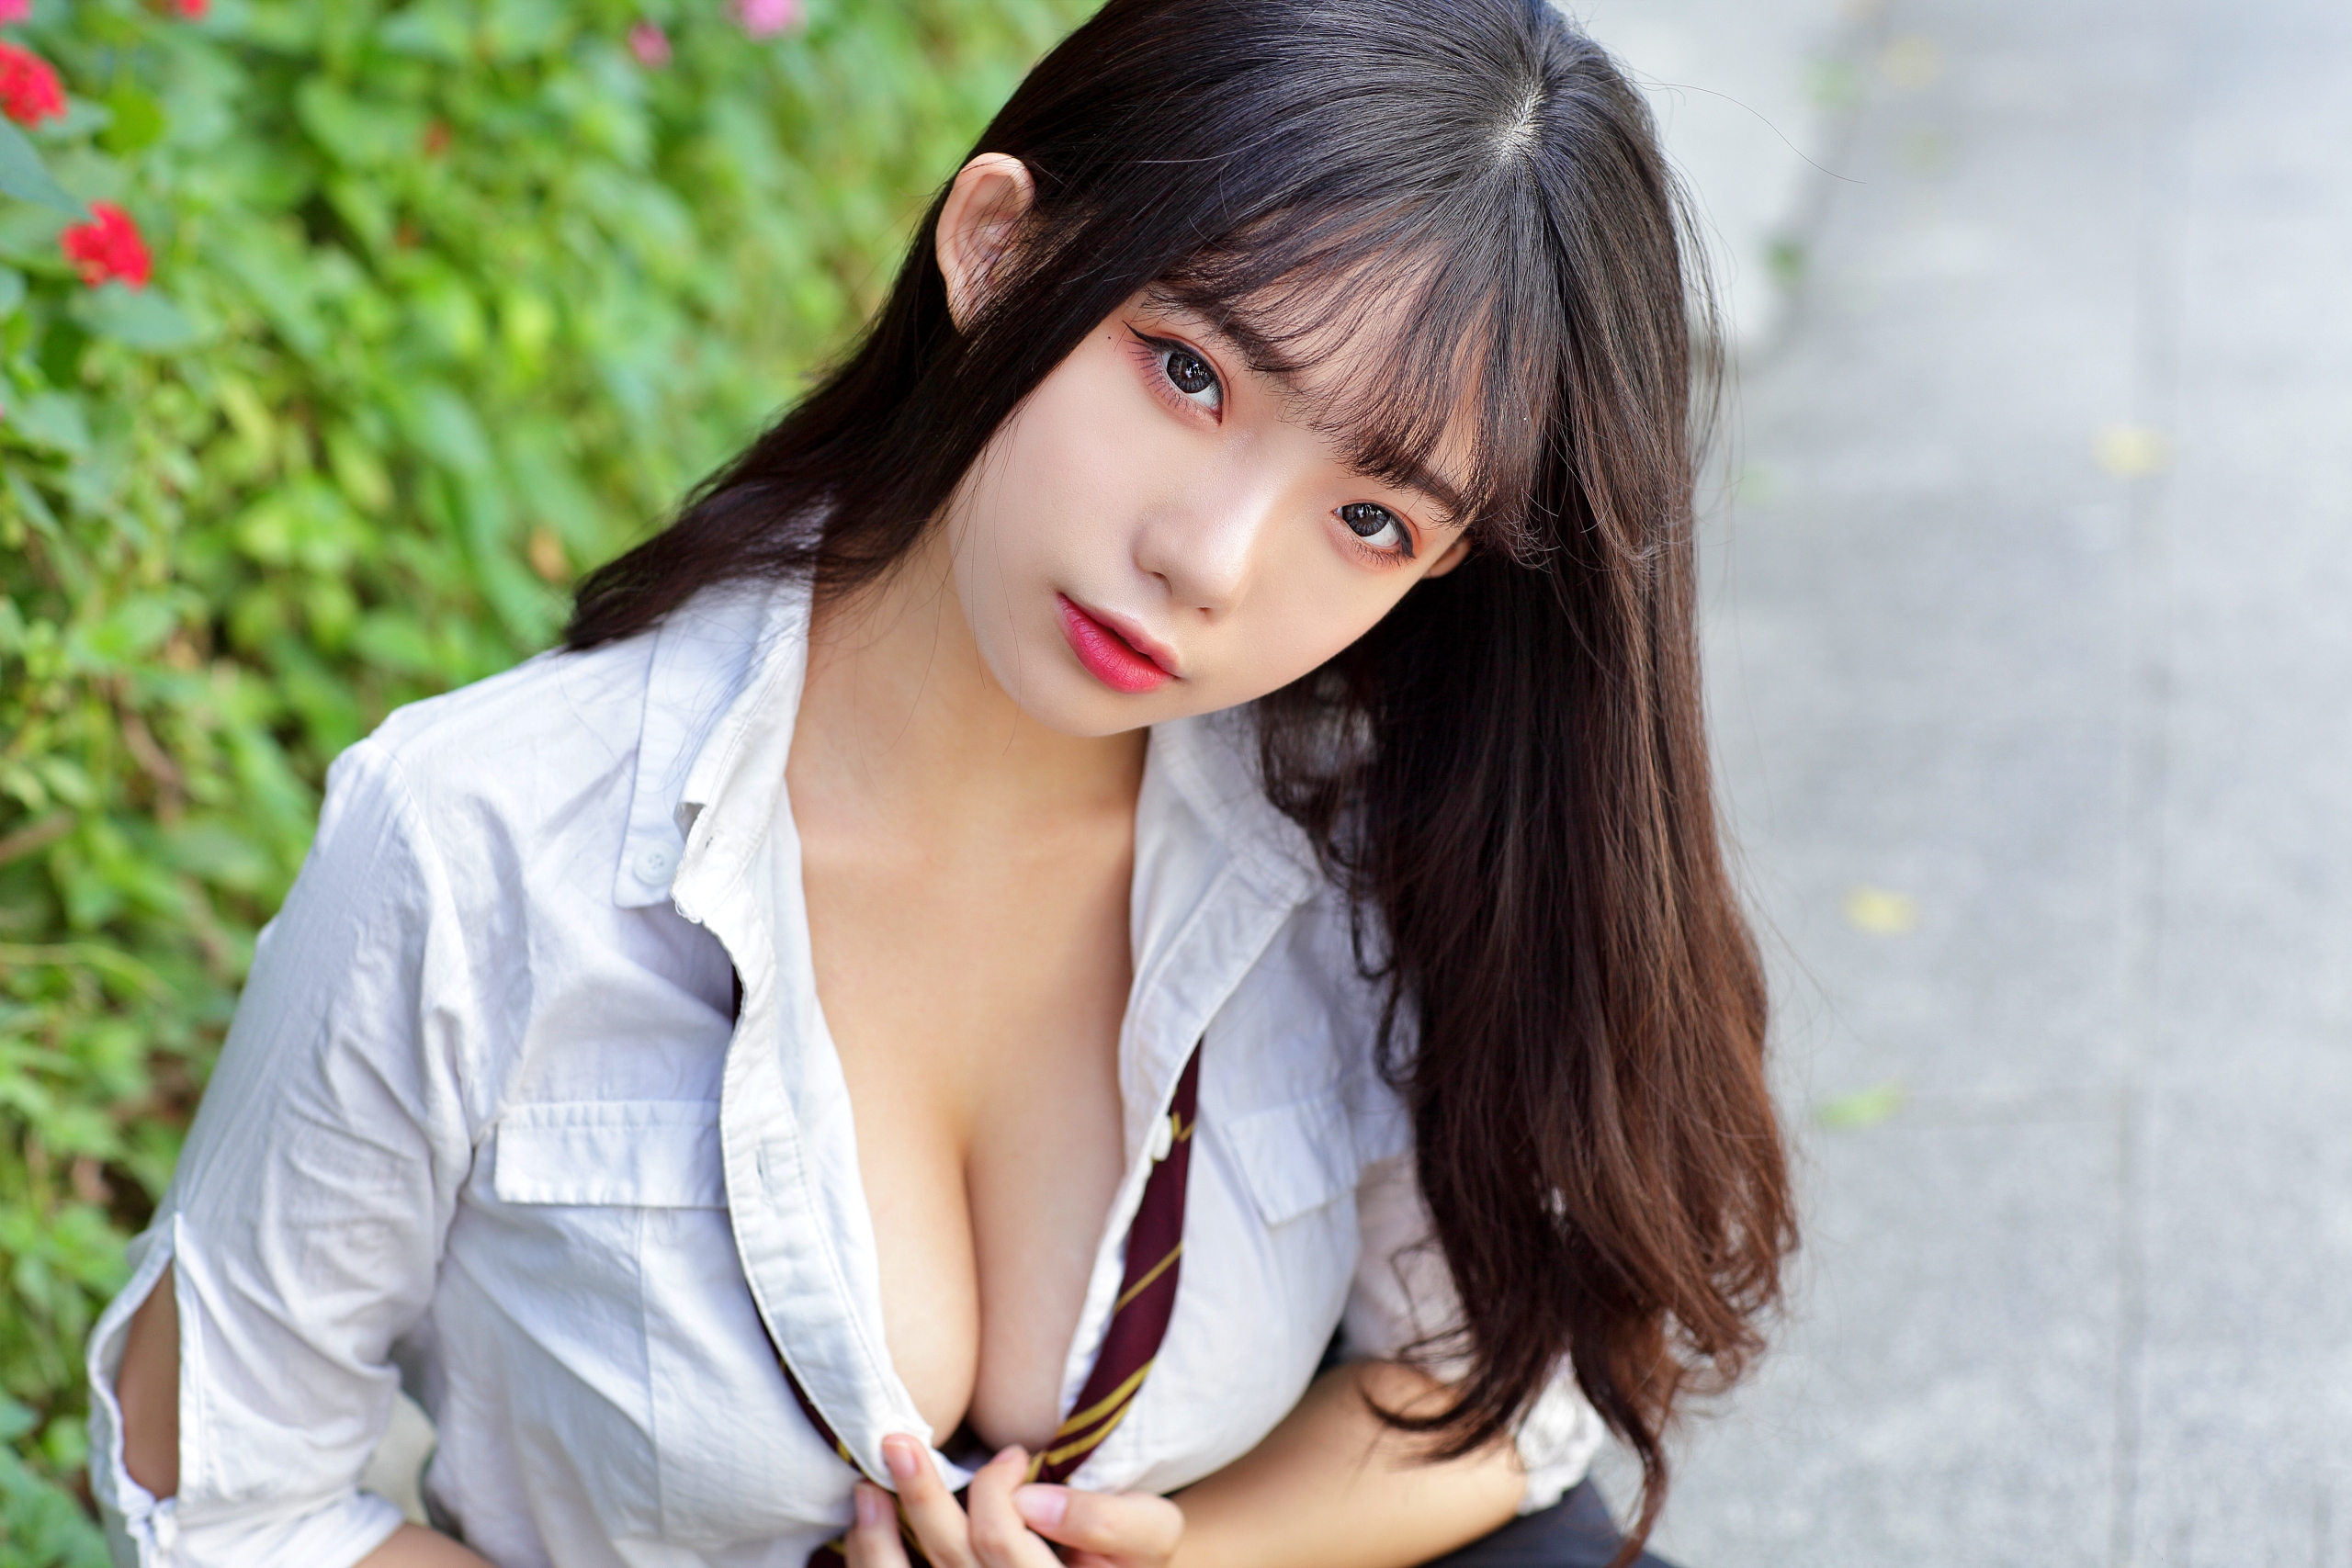 Ning Shioulin Women Model Brunette Long Hair Bangs Looking At Viewer Parted Lips Shirt Tie Depth Of  2560x1707